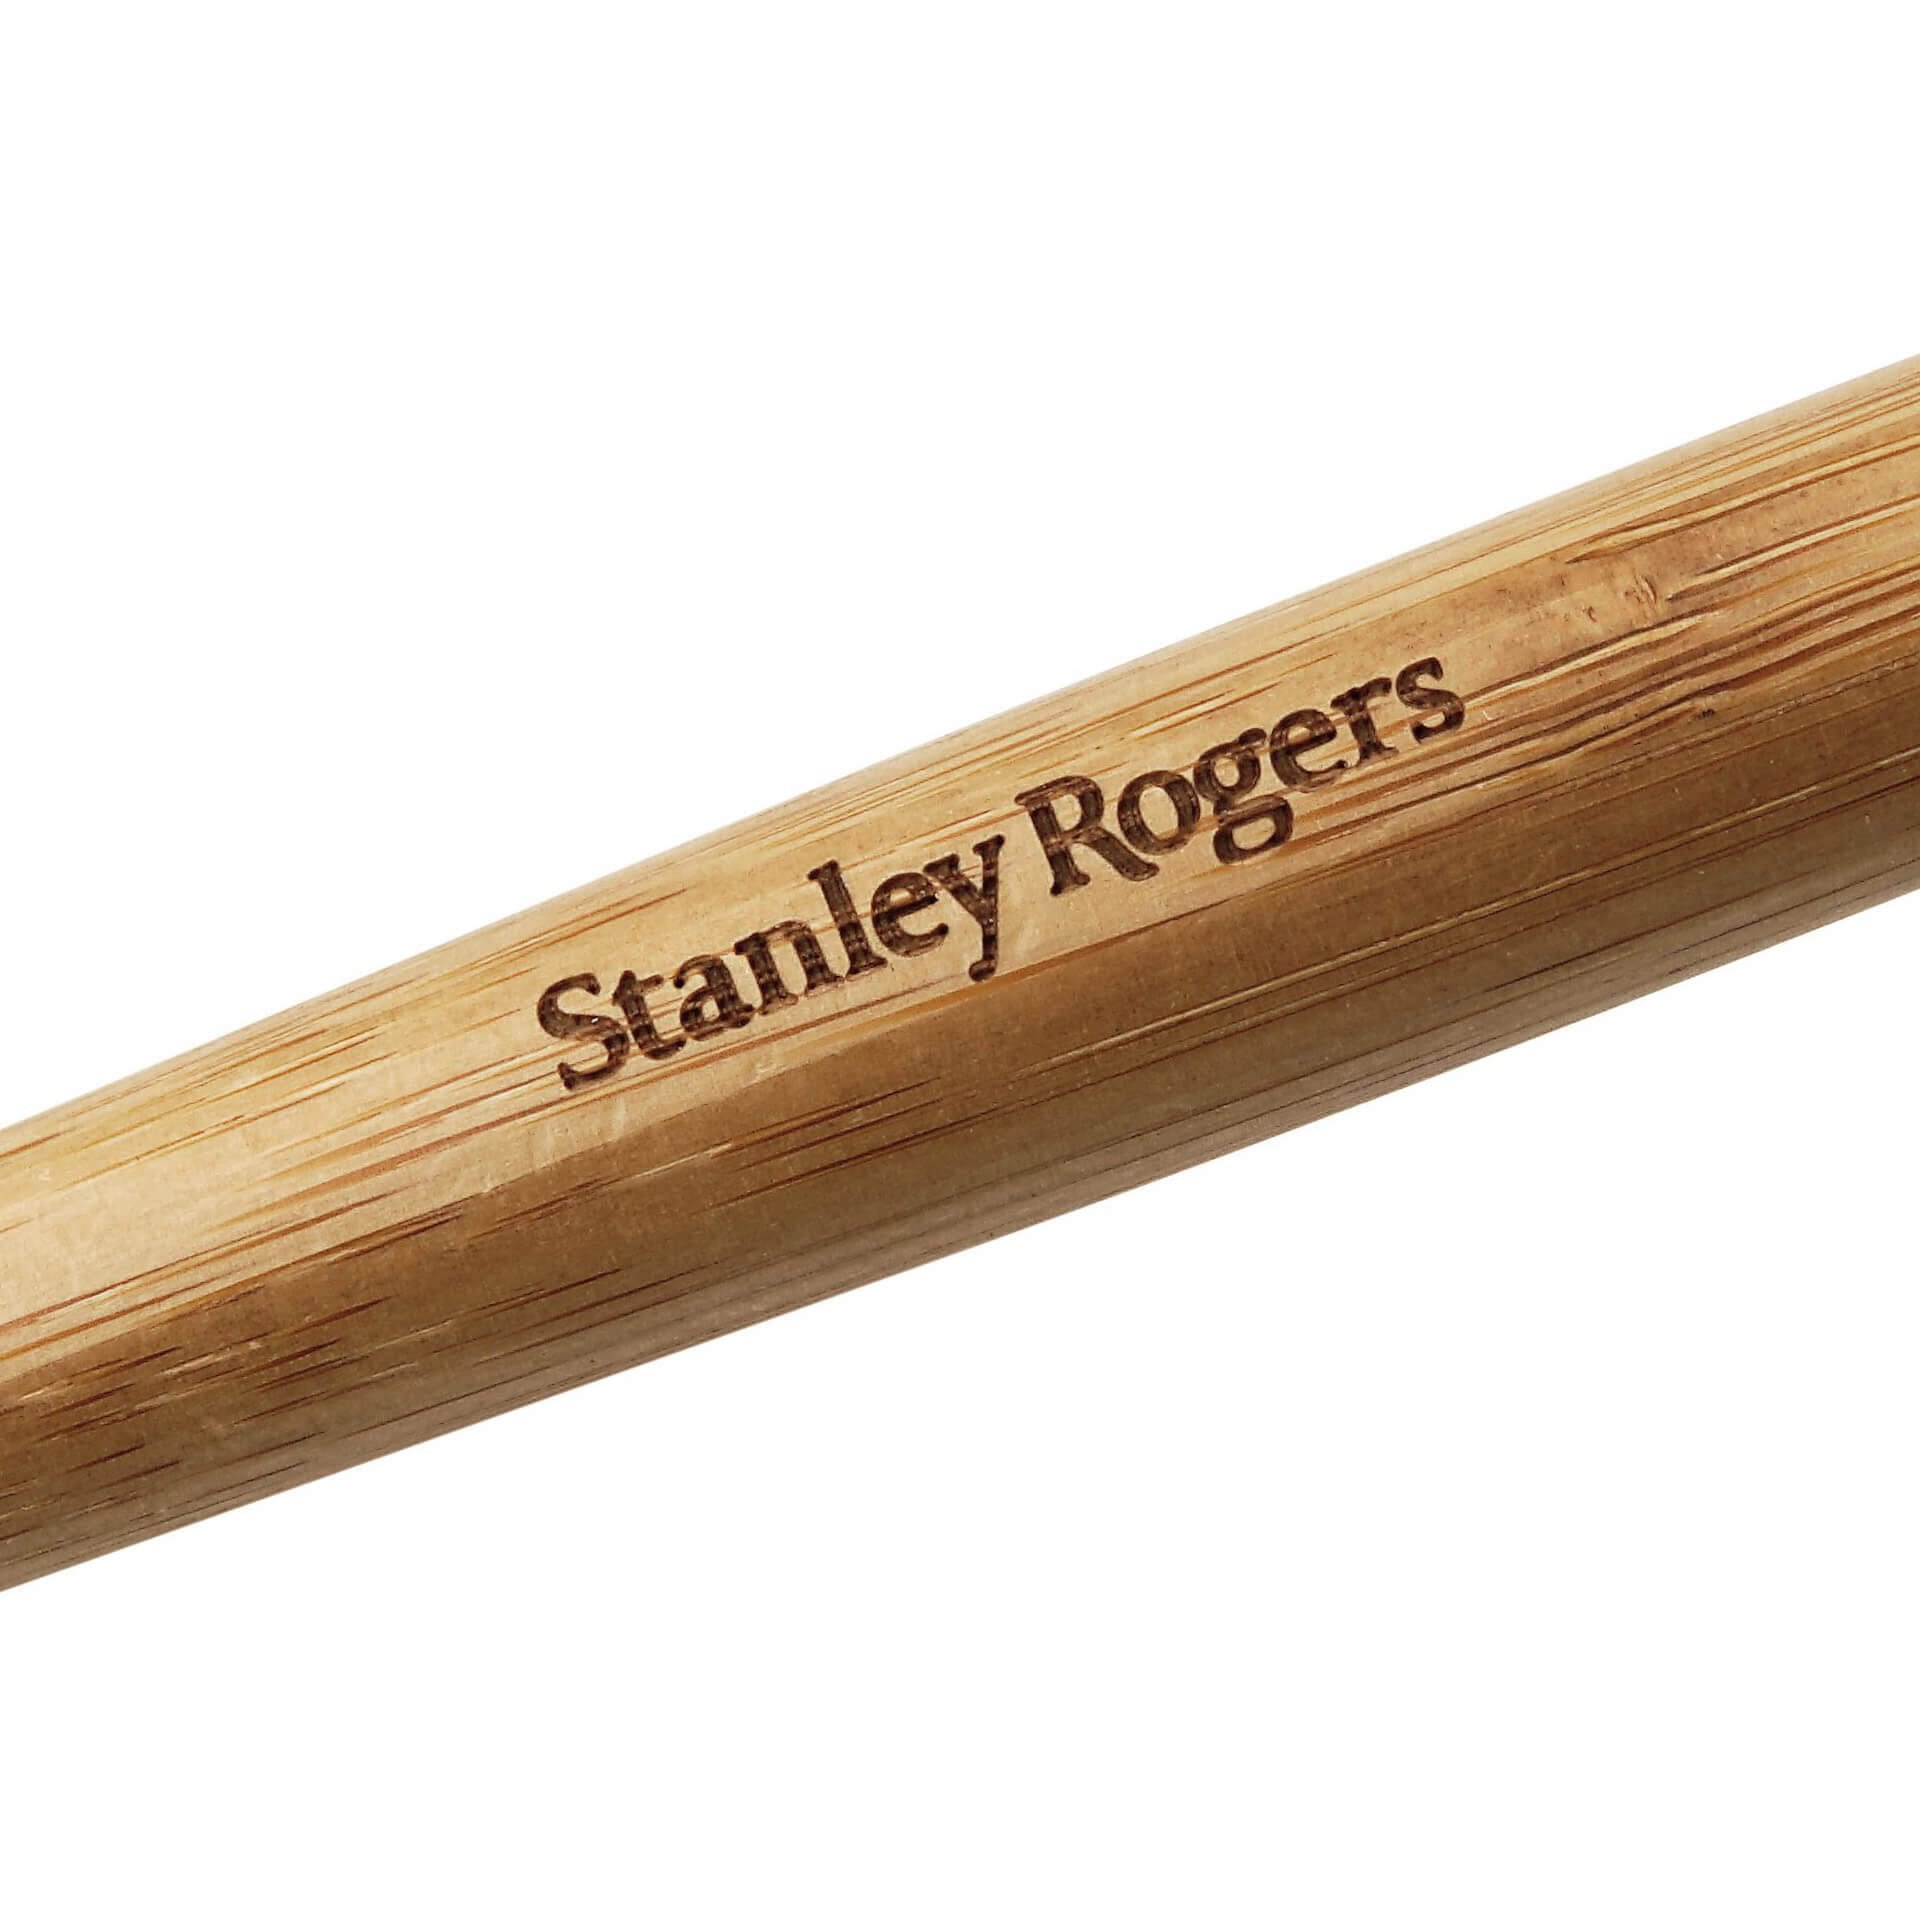 Stanley Rogers Slotted Turner, Bamboo